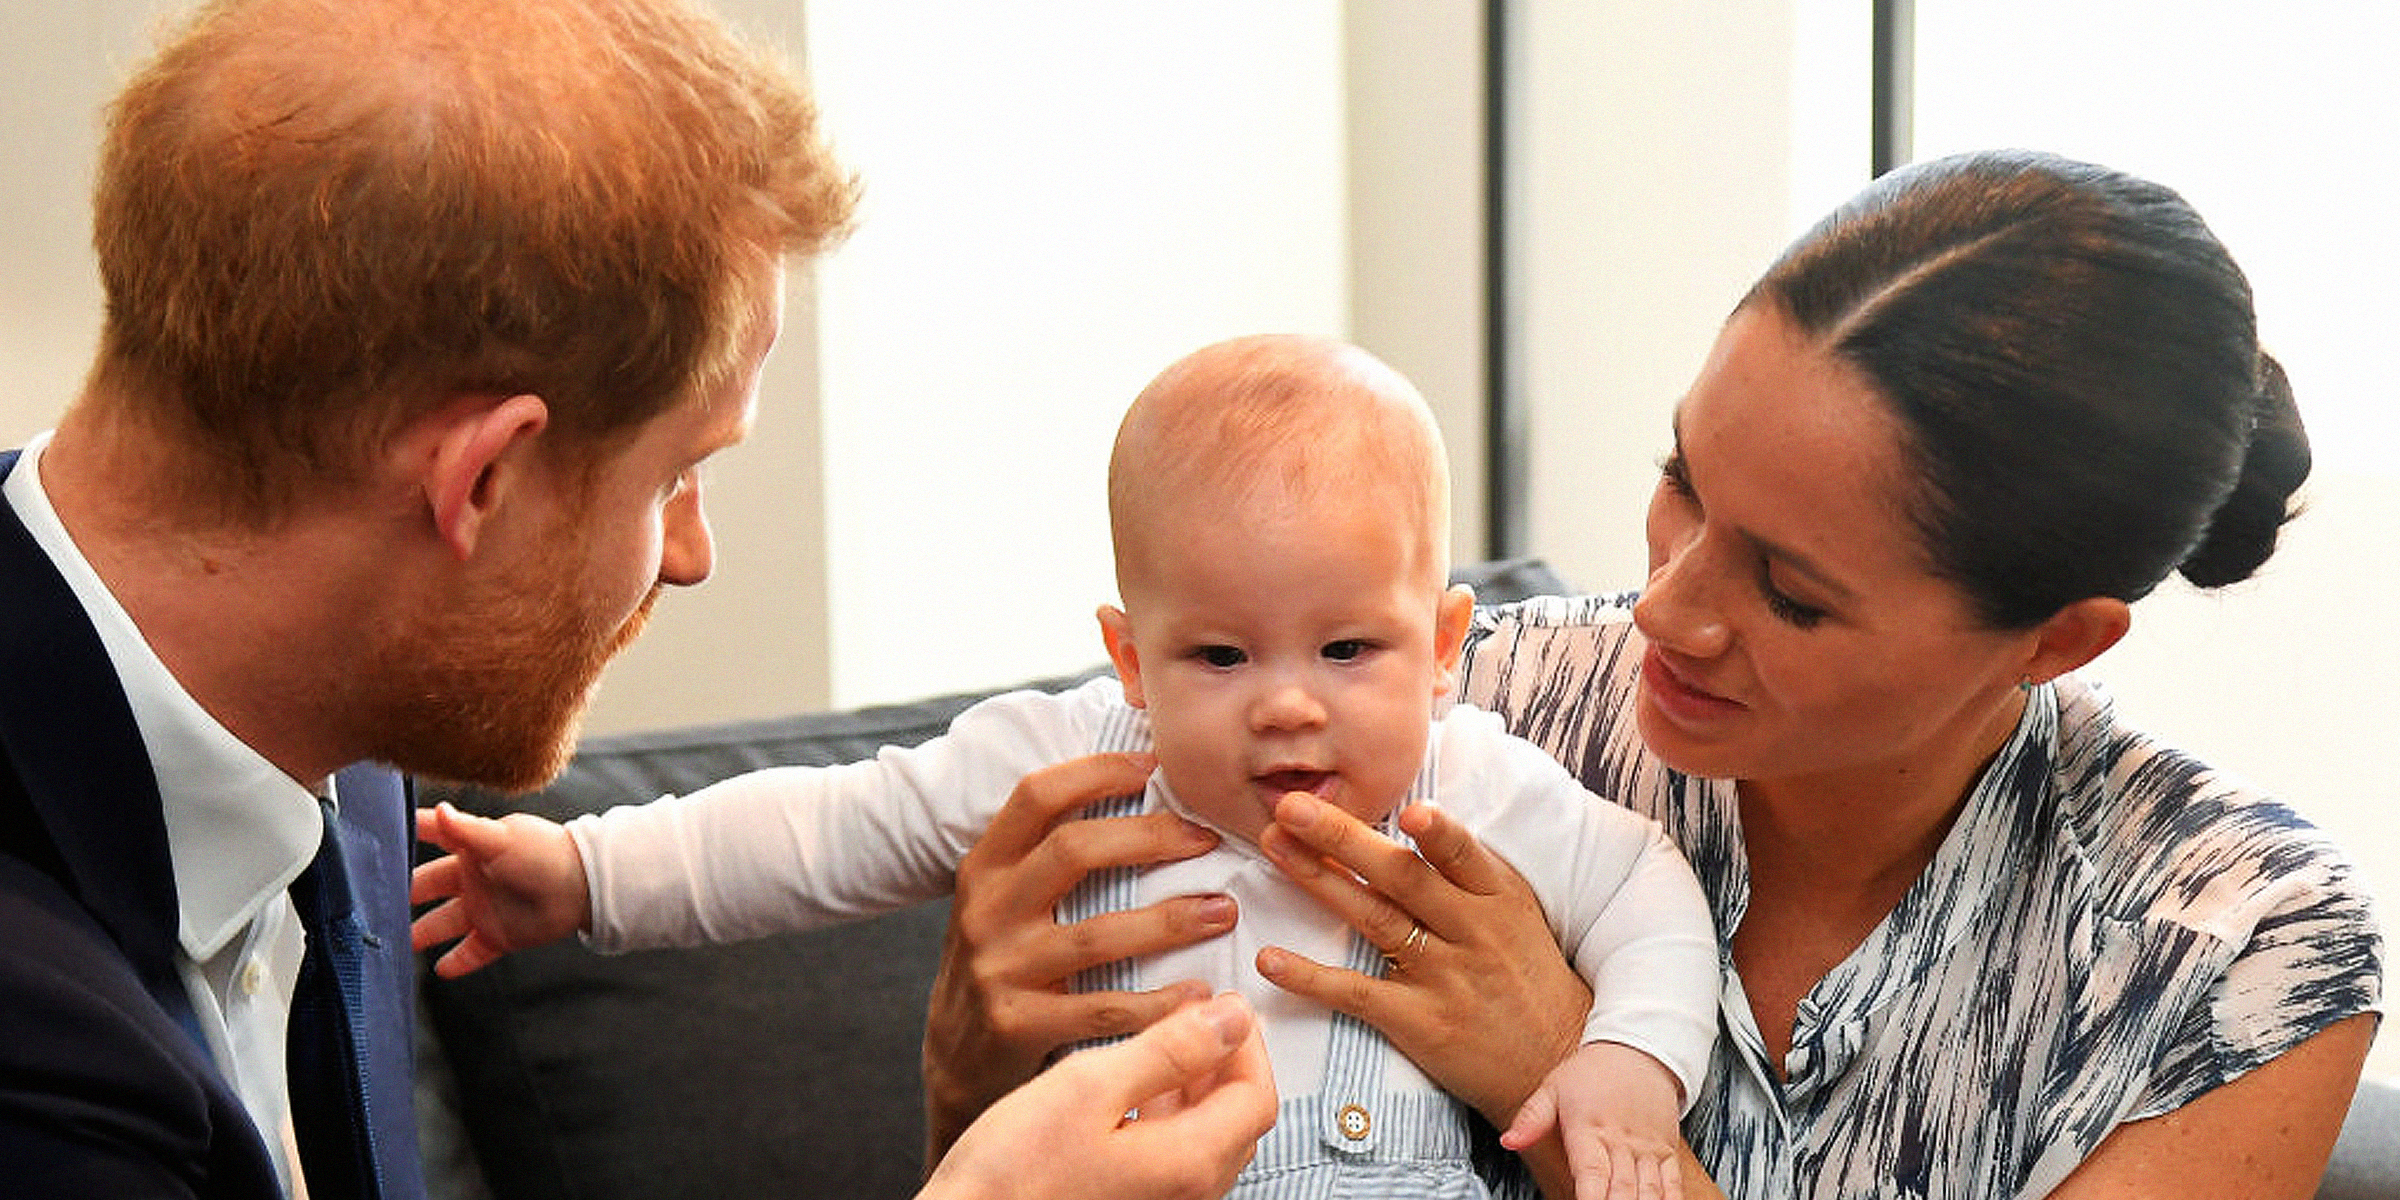 Prince Harry, Meghan Markle, and Archie | Source: Getty Images